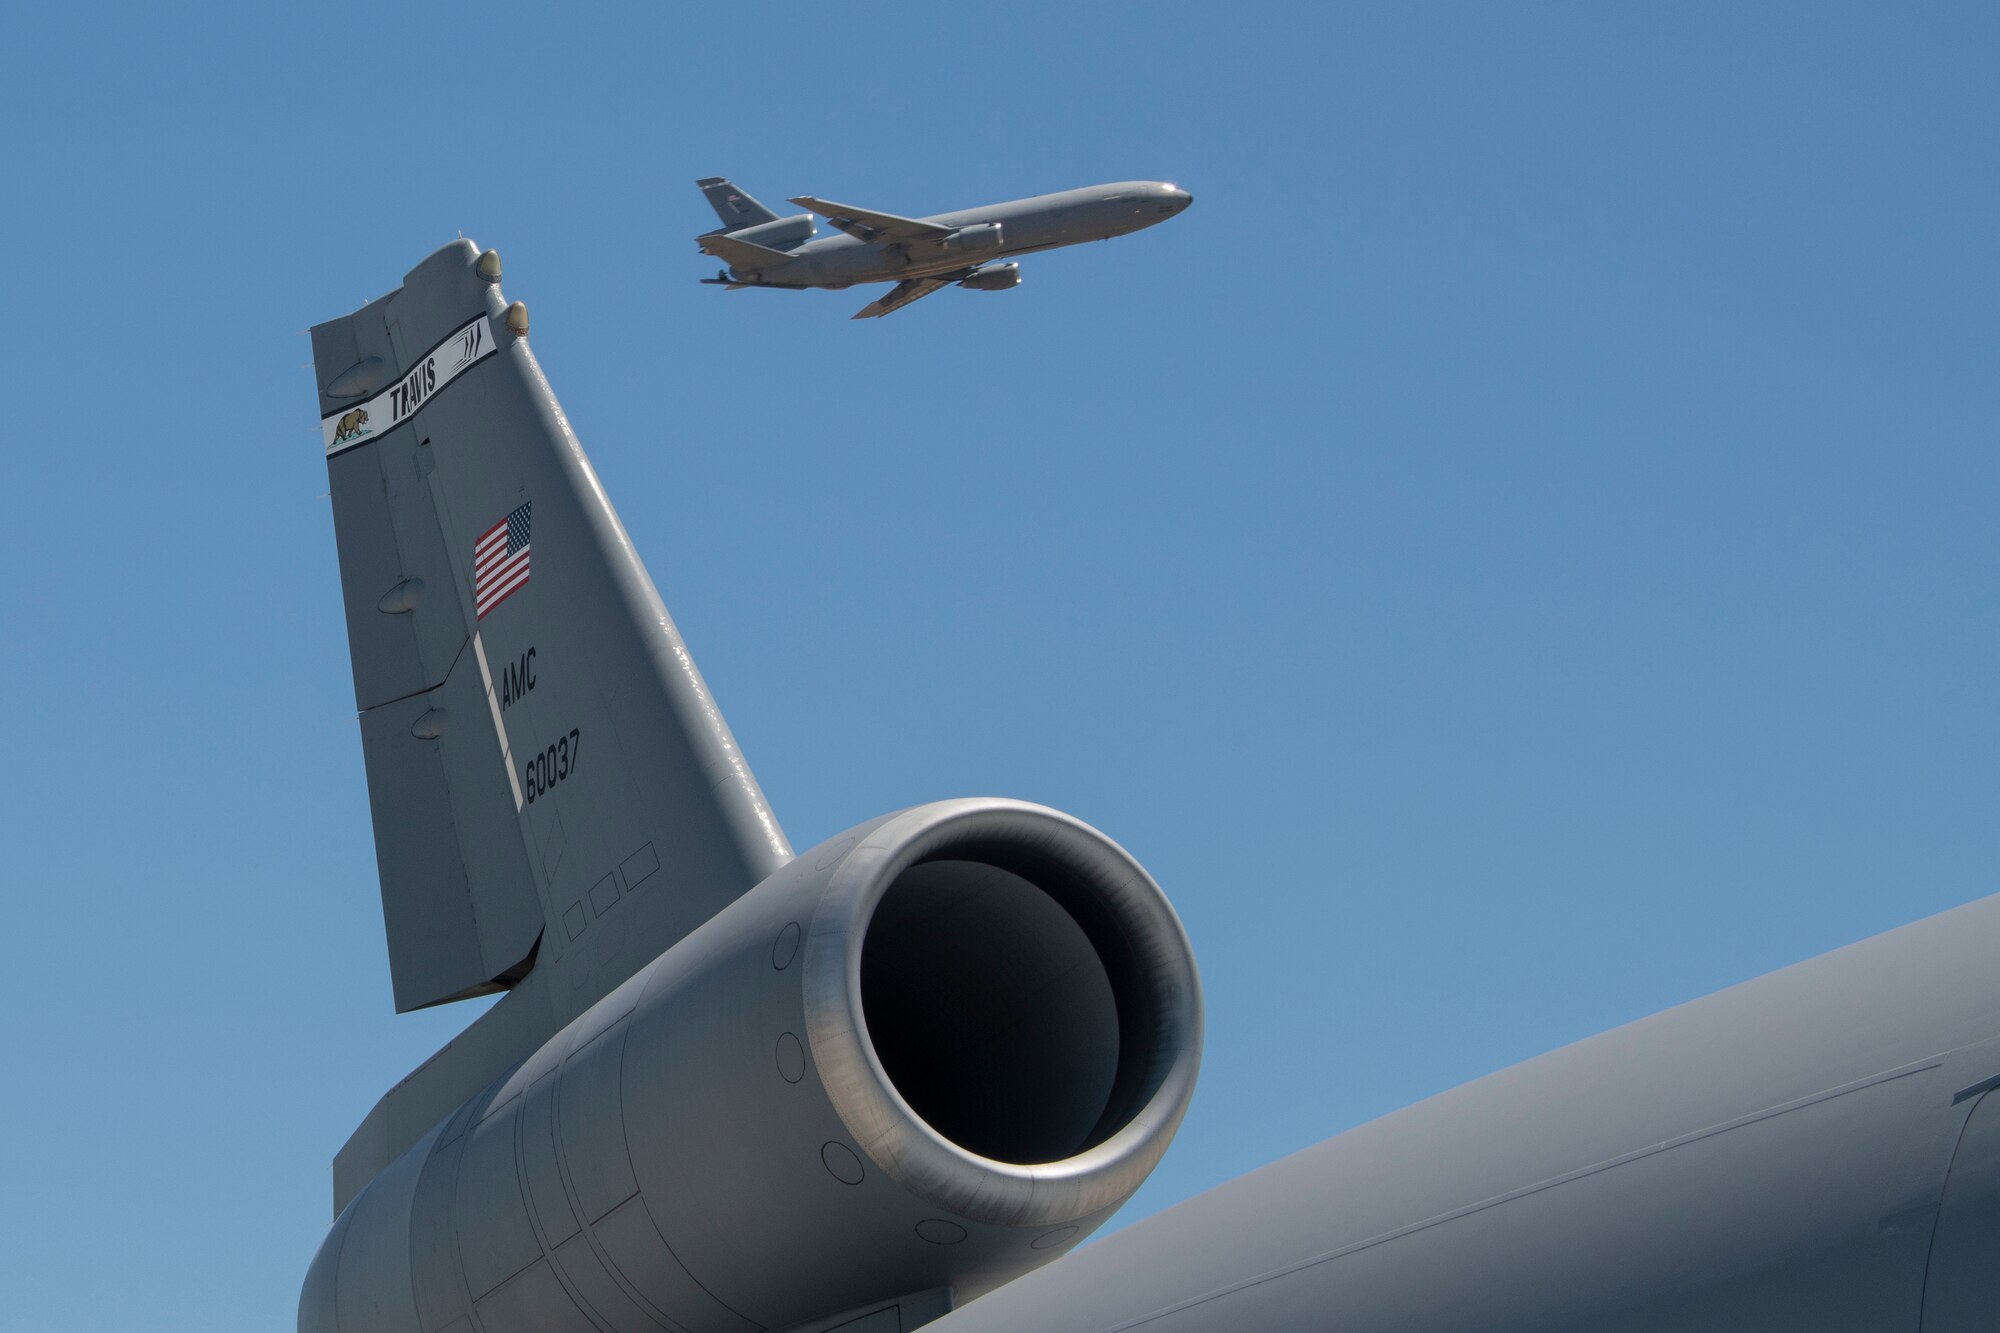 U.S. Air Force KC-10 Extender tanker aircraft based at Travis Air Force Base, California, July 11, 2019. Although the KC-l0’s primary mission is aerial refueling, it can combine the tasks of a tanker and cargo aircraft by refueling fighters while simultaneously carrying support personnel and equipment. (U.S. Air Force photo by Heide Couch)